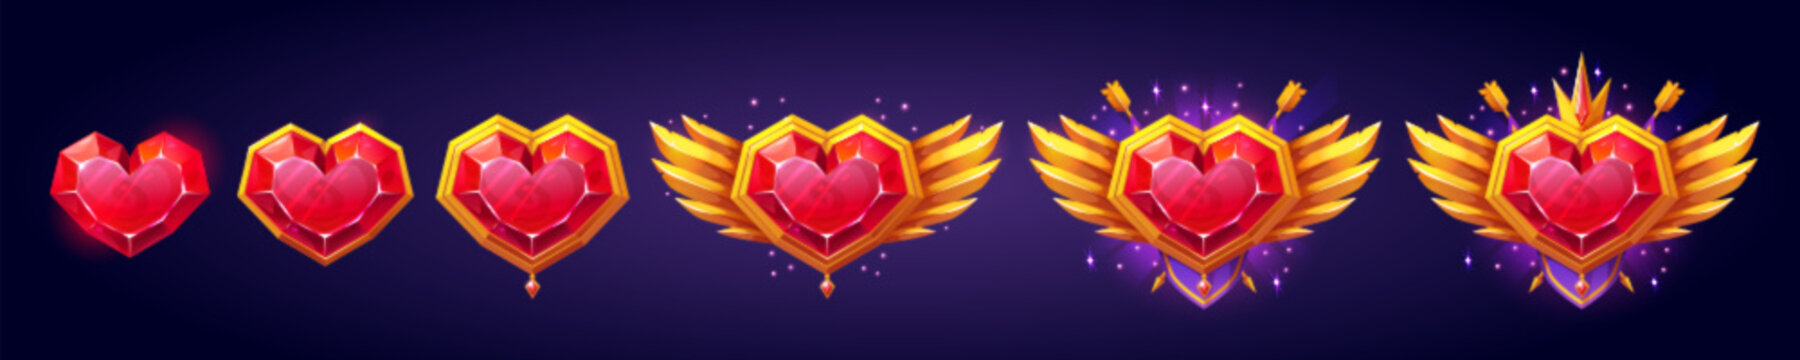 Heart gem rank medal game badge in gold metal design with wings. Isolated achievement icon amulet or button asset set. Magic medieval jewelry trophy for user progress rating.